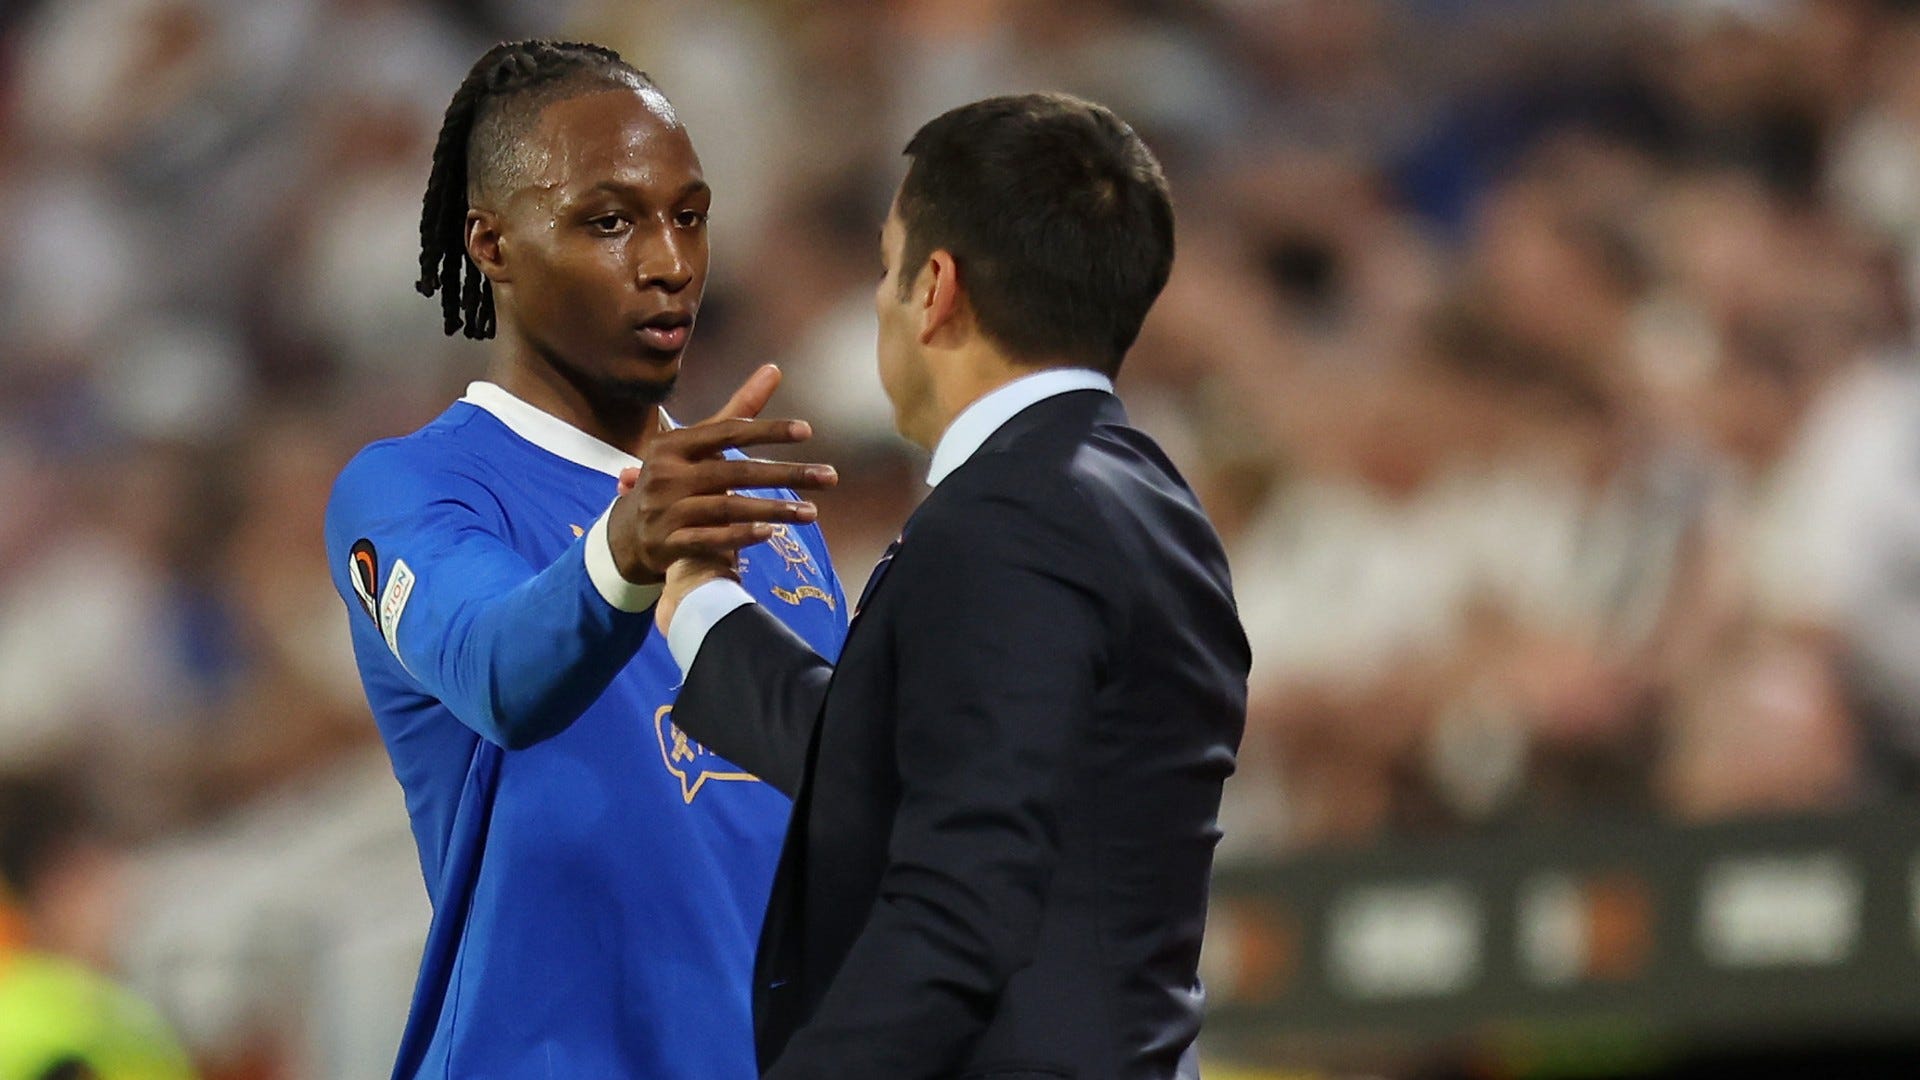 Rangers manager praises Aribo and supports his potential Premier League move